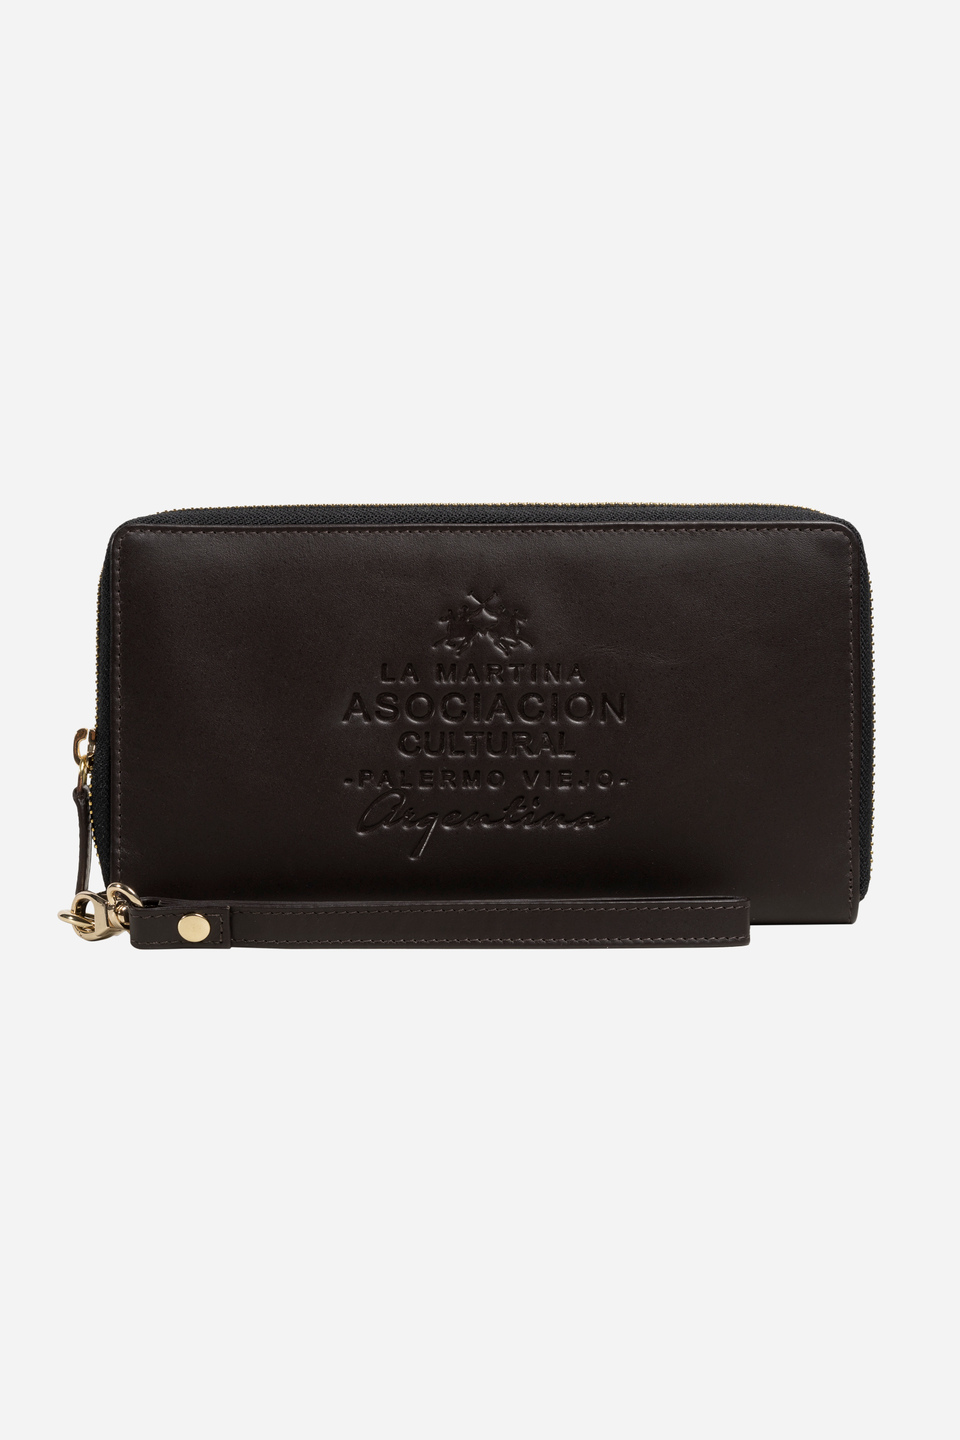 Small leather bodybag | La Martina - Official Online Shop